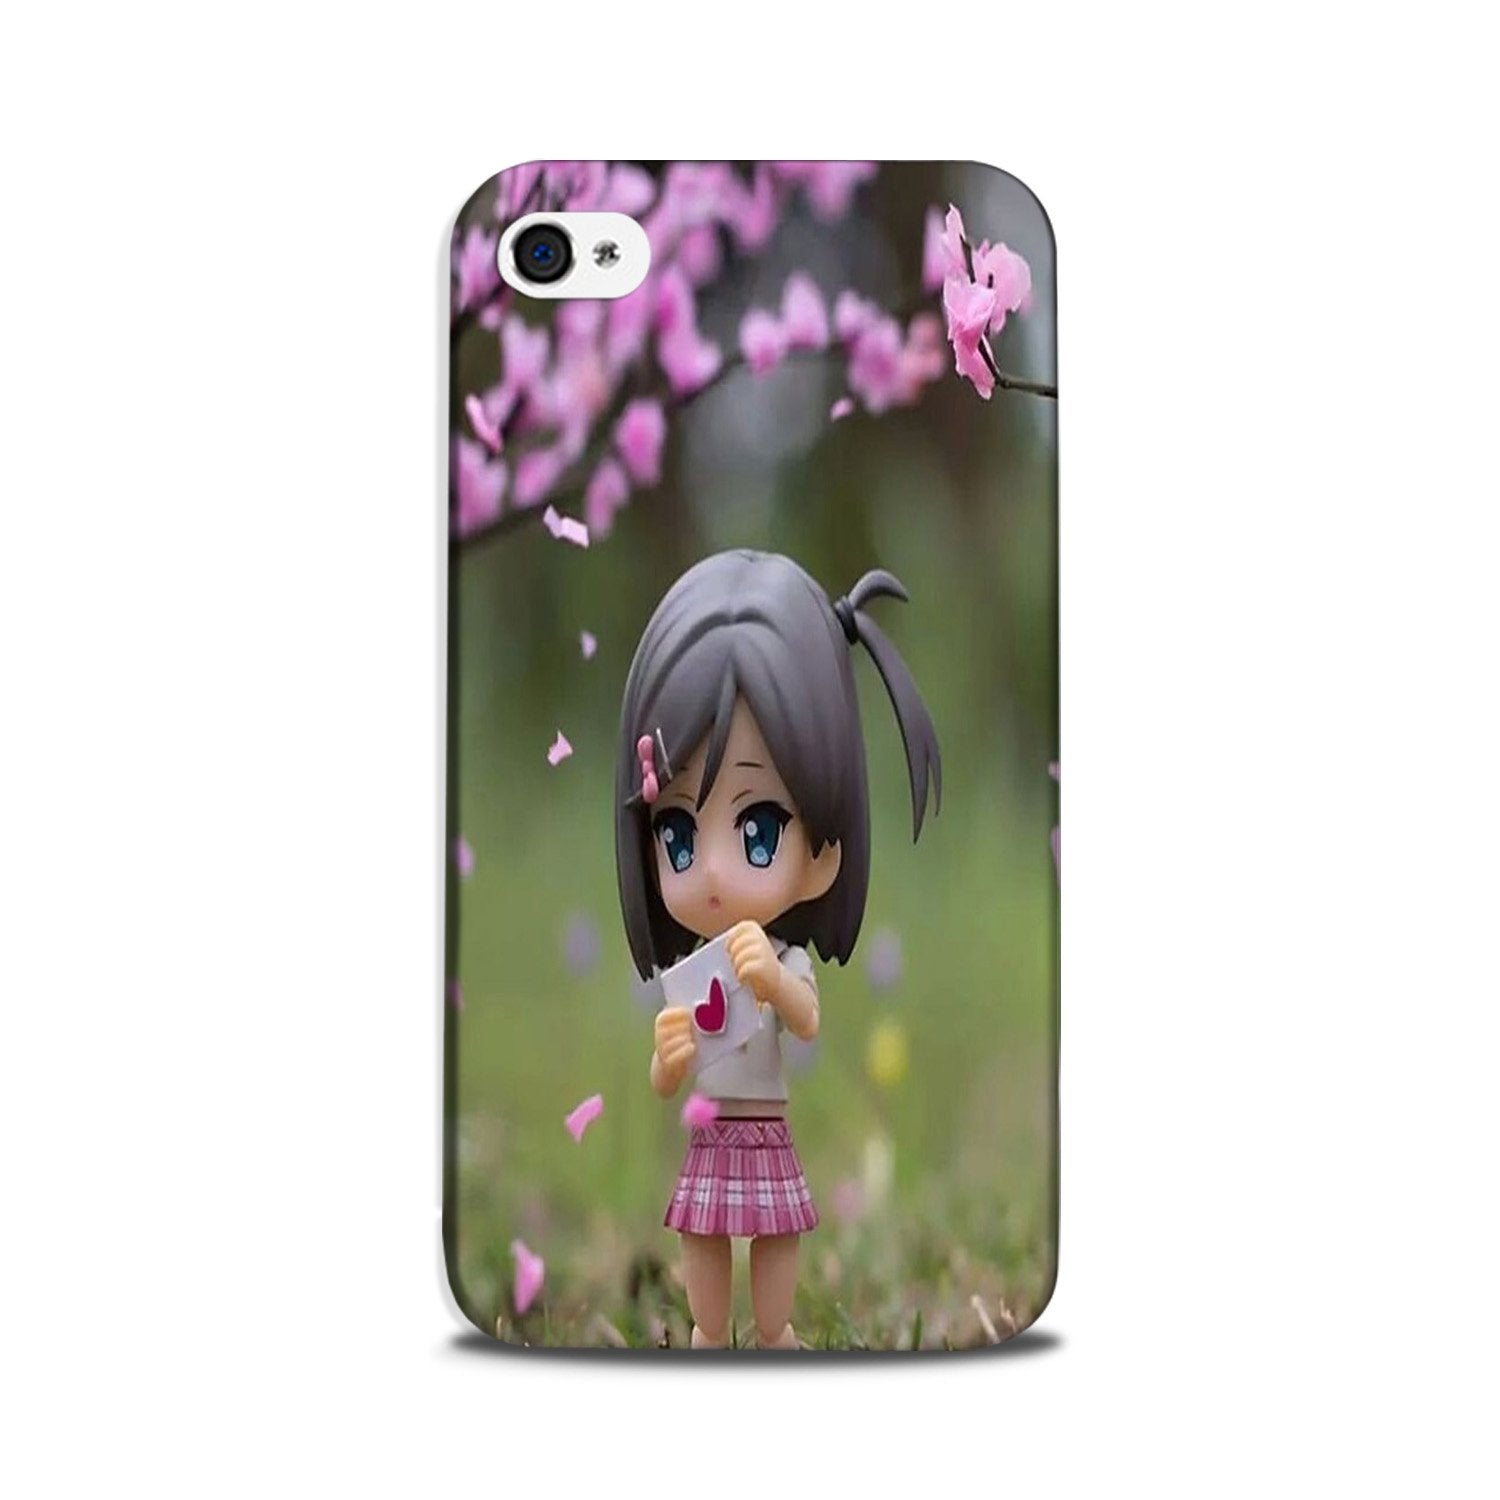 Cute Girl Case for iPhone 5/ 5s